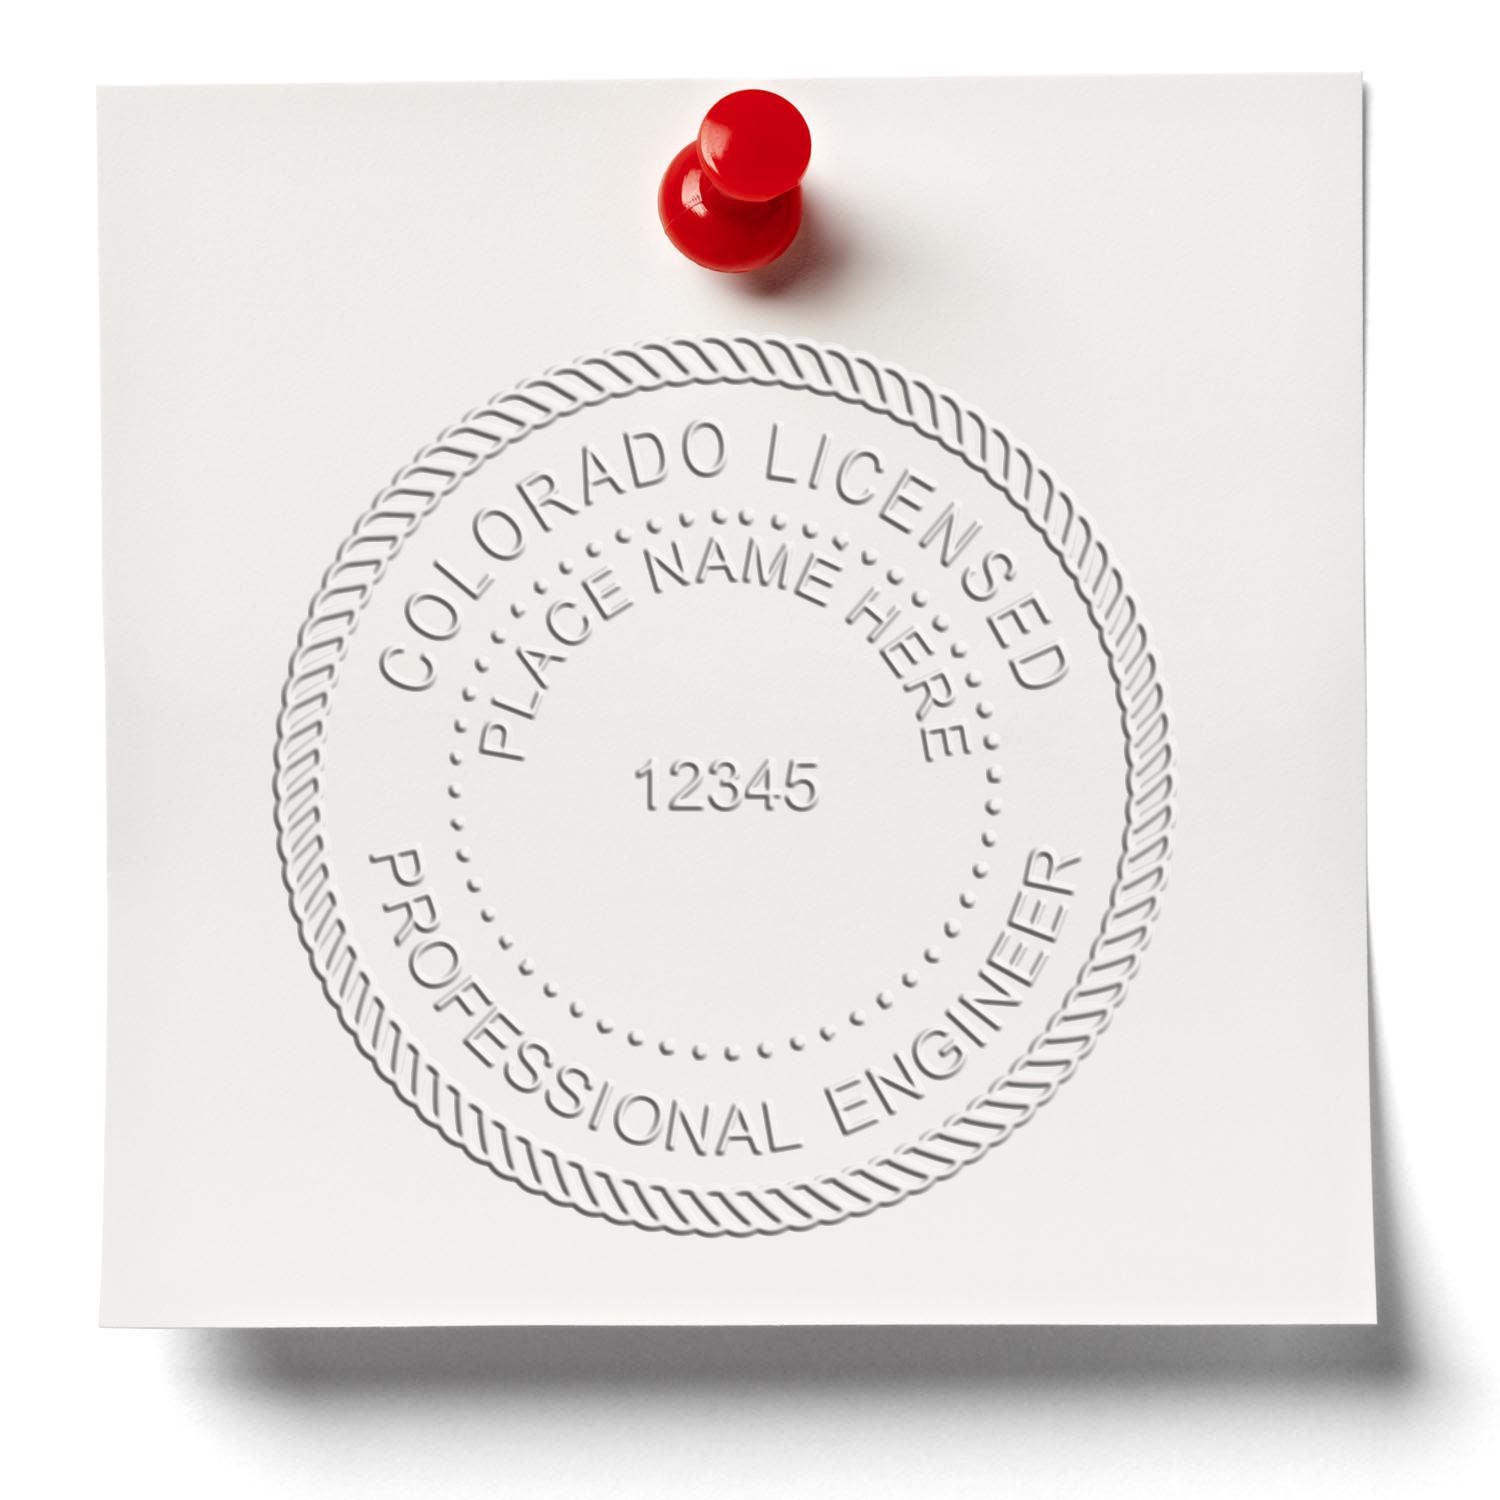 A photograph of the Long Reach Colorado PE Seal stamp impression reveals a vivid, professional image of the on paper.